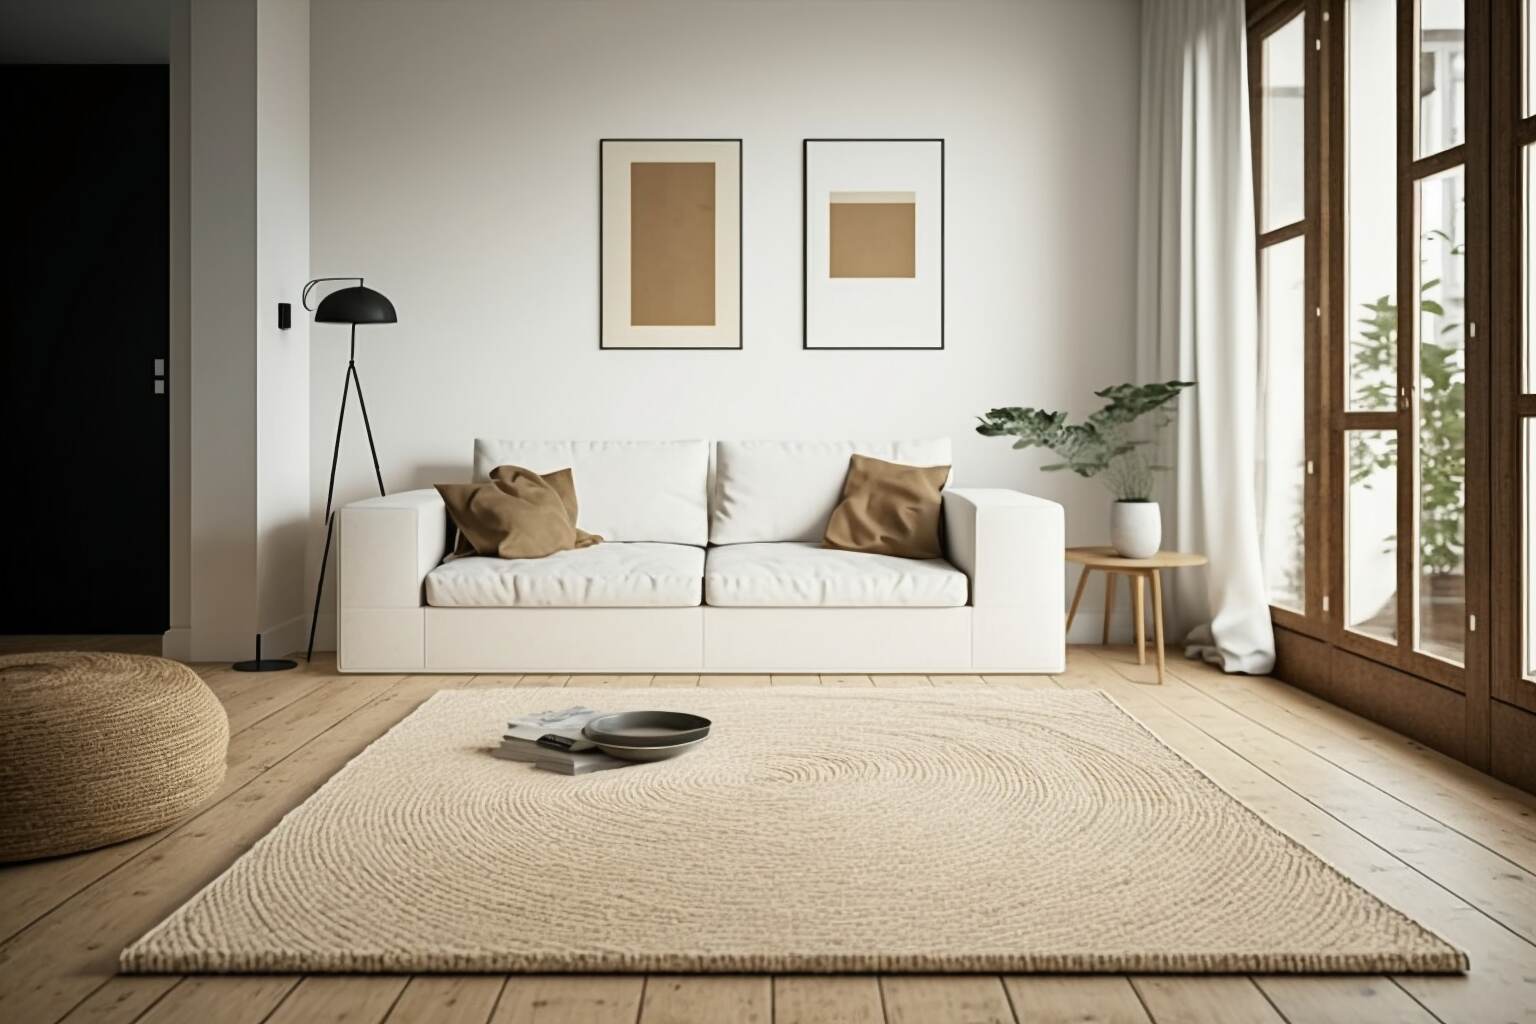 Living Room With A Woven Jute Rug For Added Texture